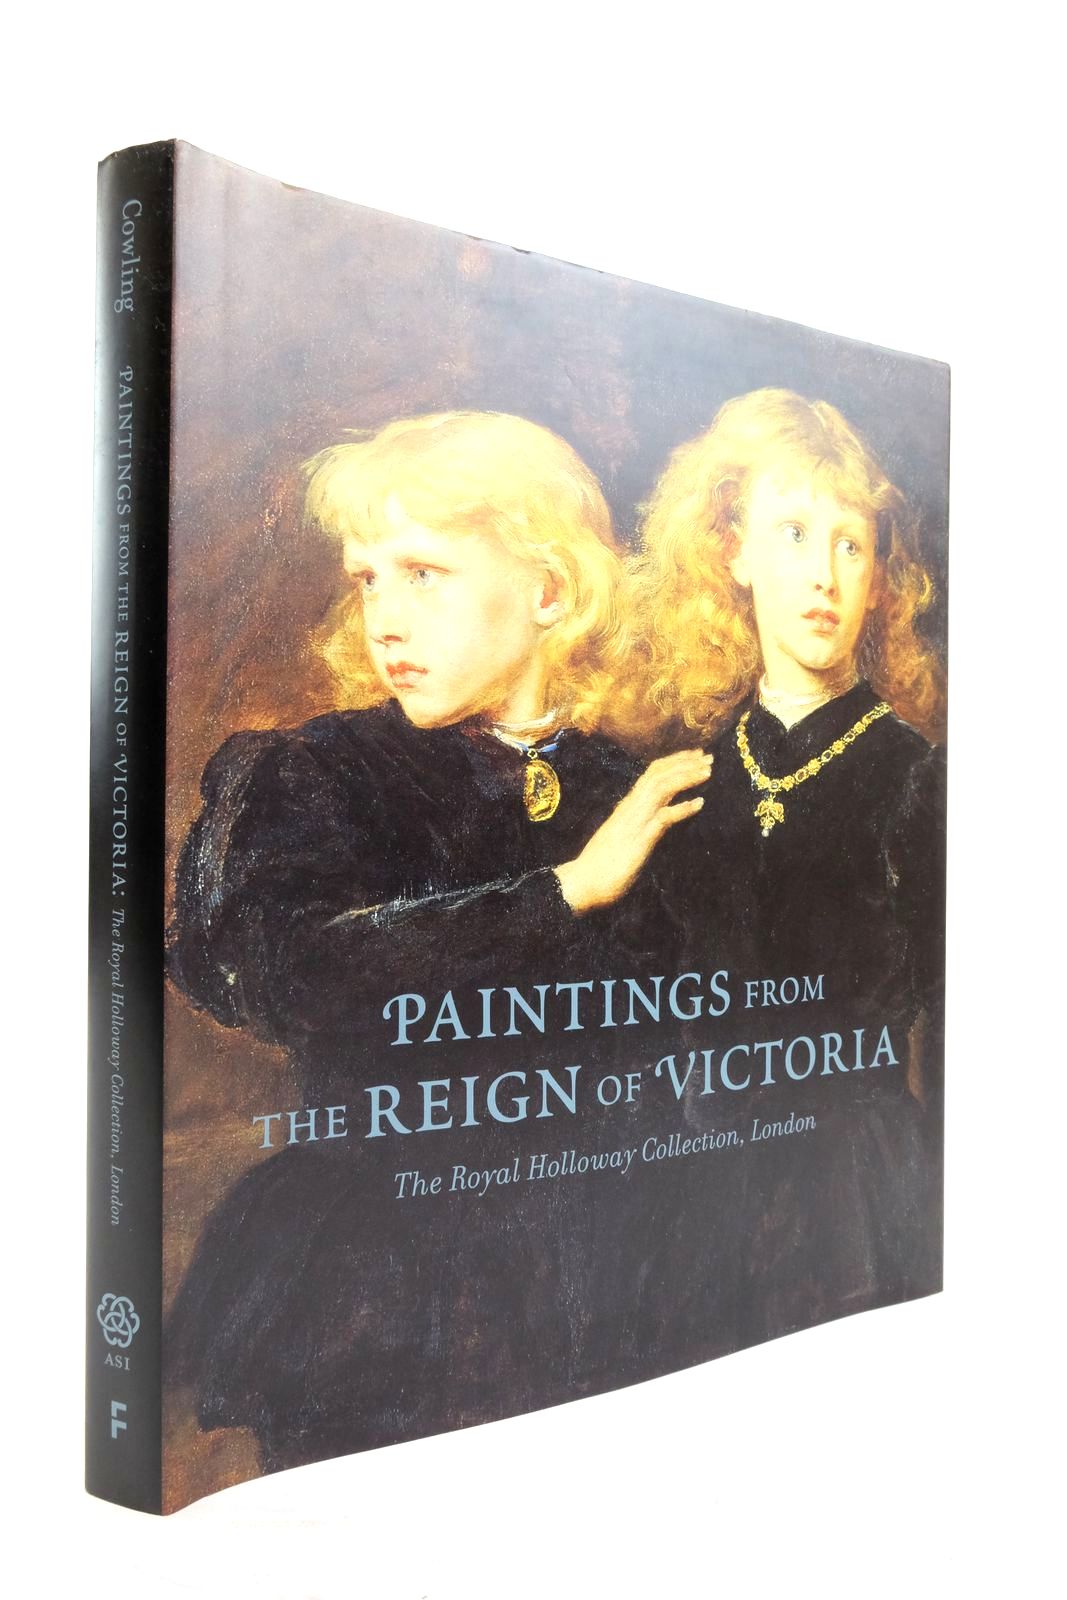 Photo of PAINTINGS FROM THE REIGN OF VICTORIA written by Cowling, Mary Barringer, Tim et al, published by Art Services International (STOCK CODE: 2137707)  for sale by Stella & Rose's Books